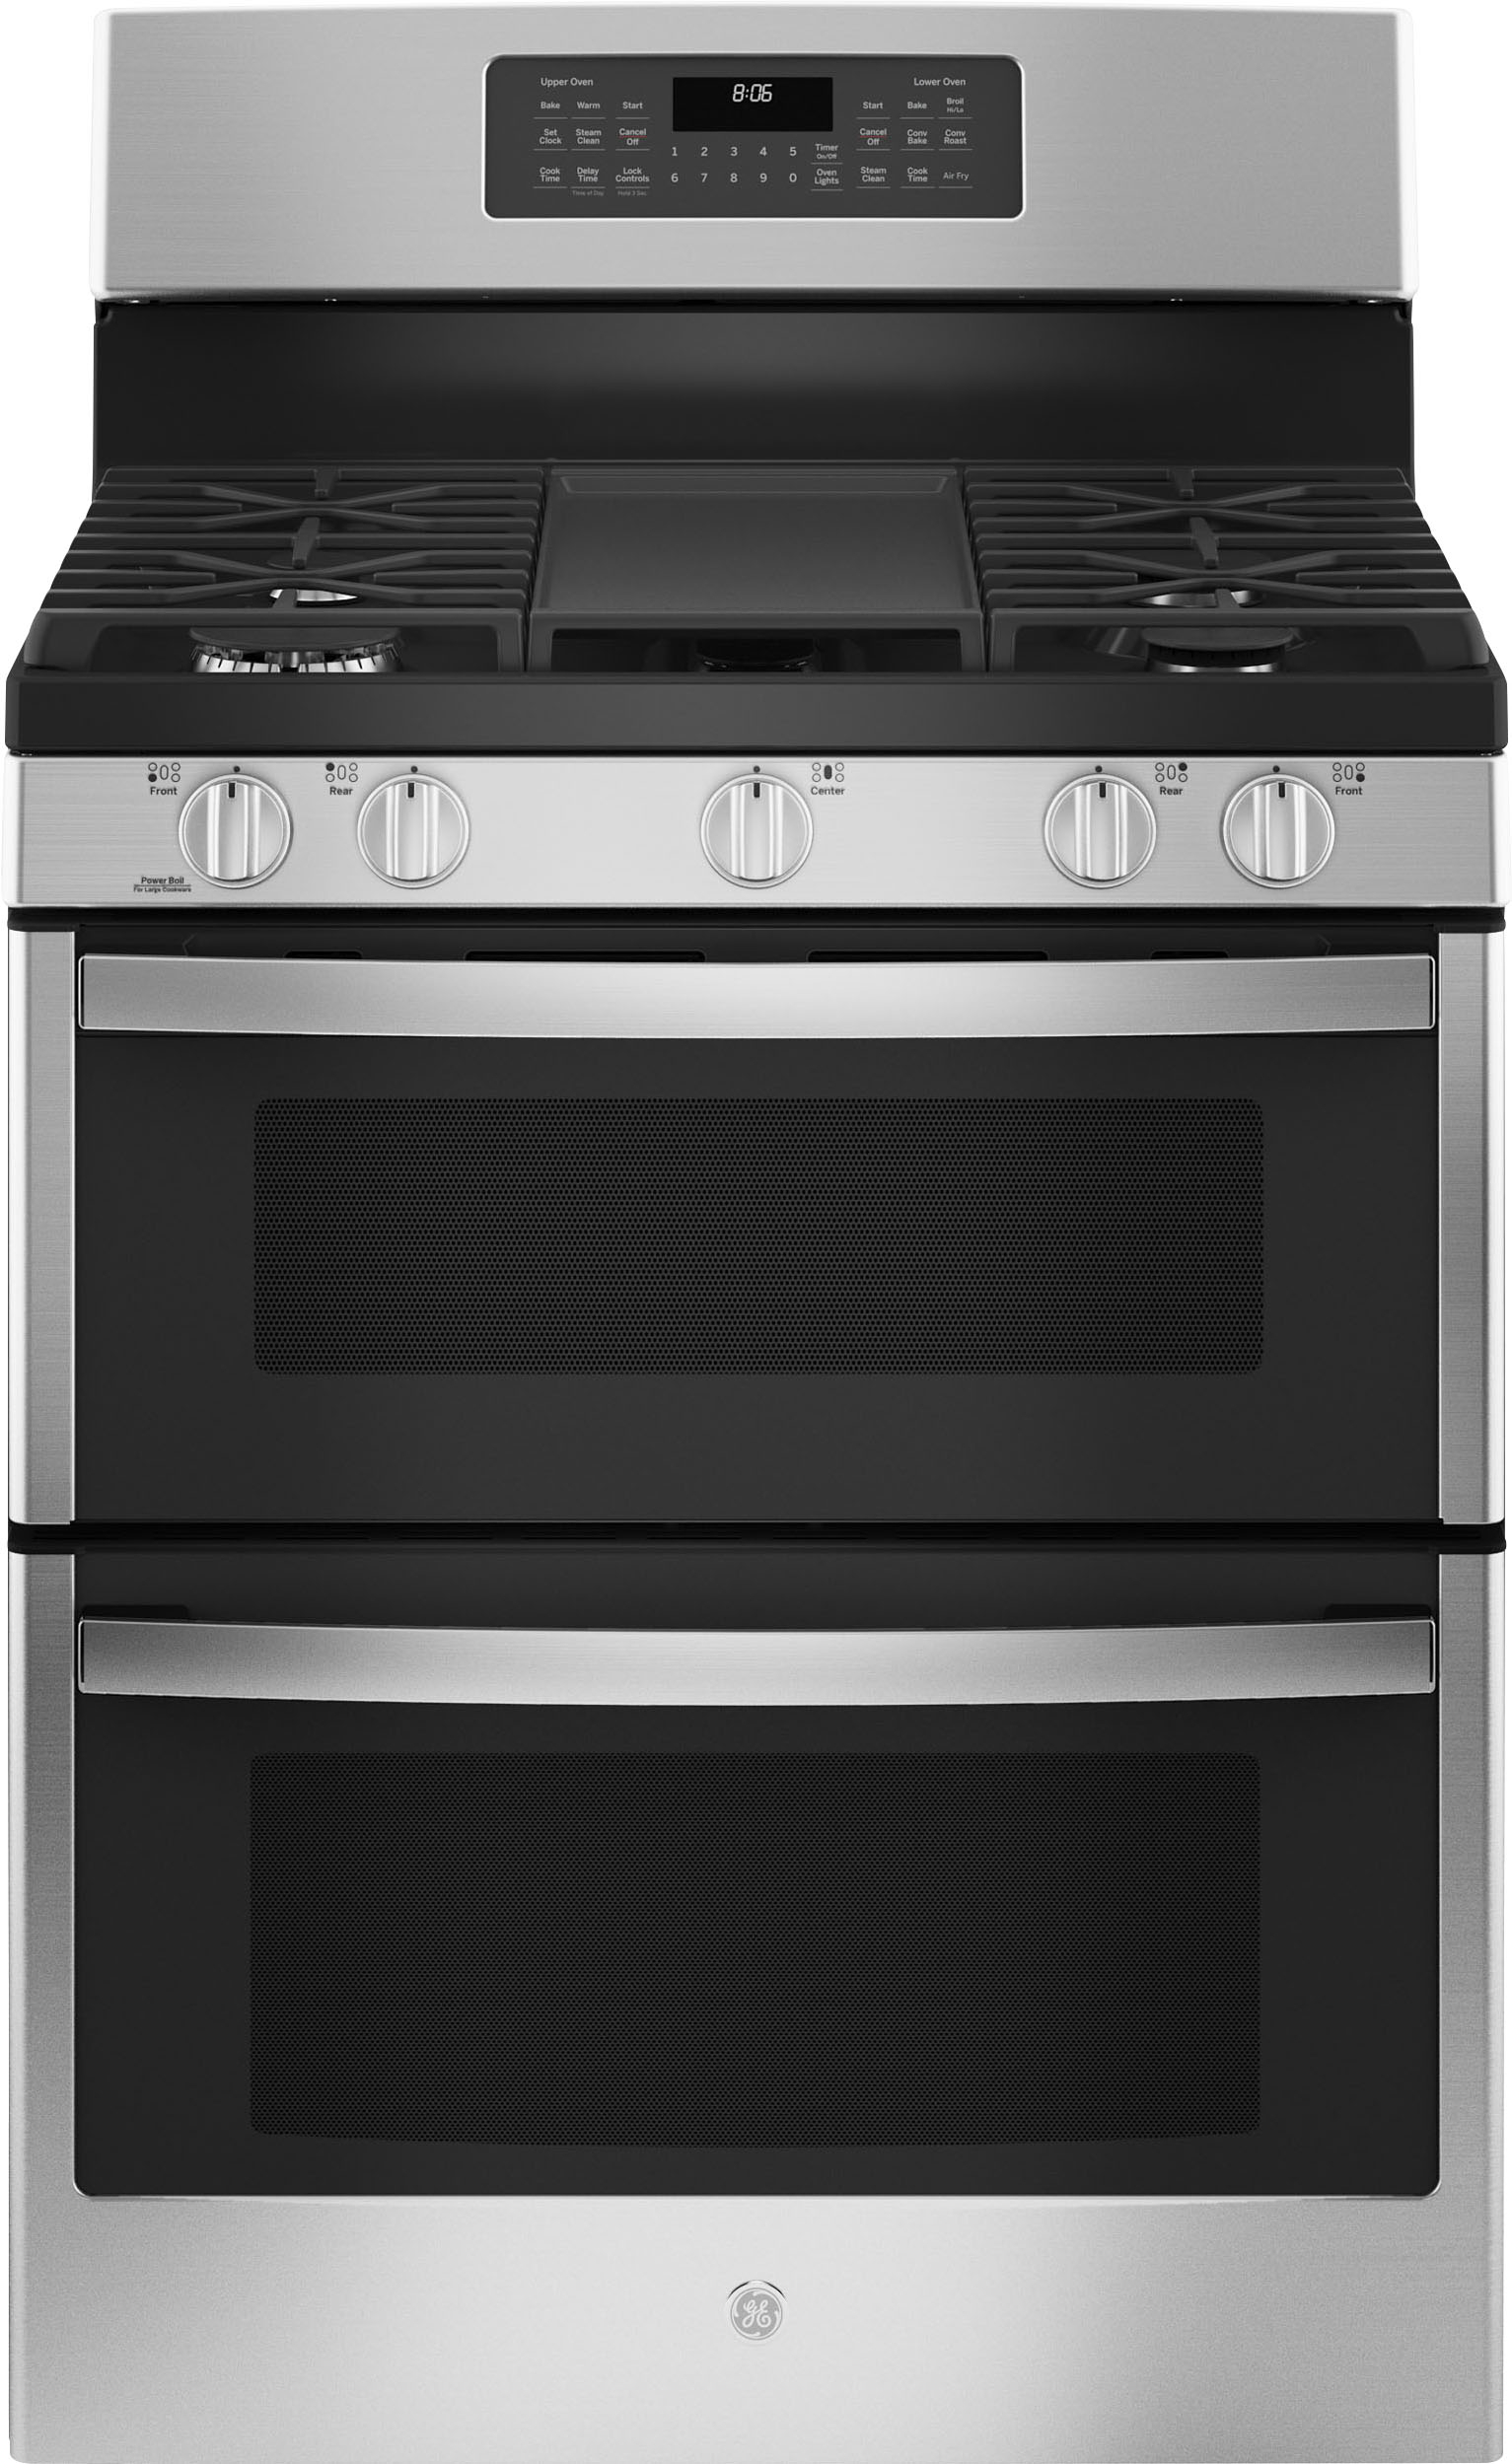 5 Questions Before Buying A New Combi Oven